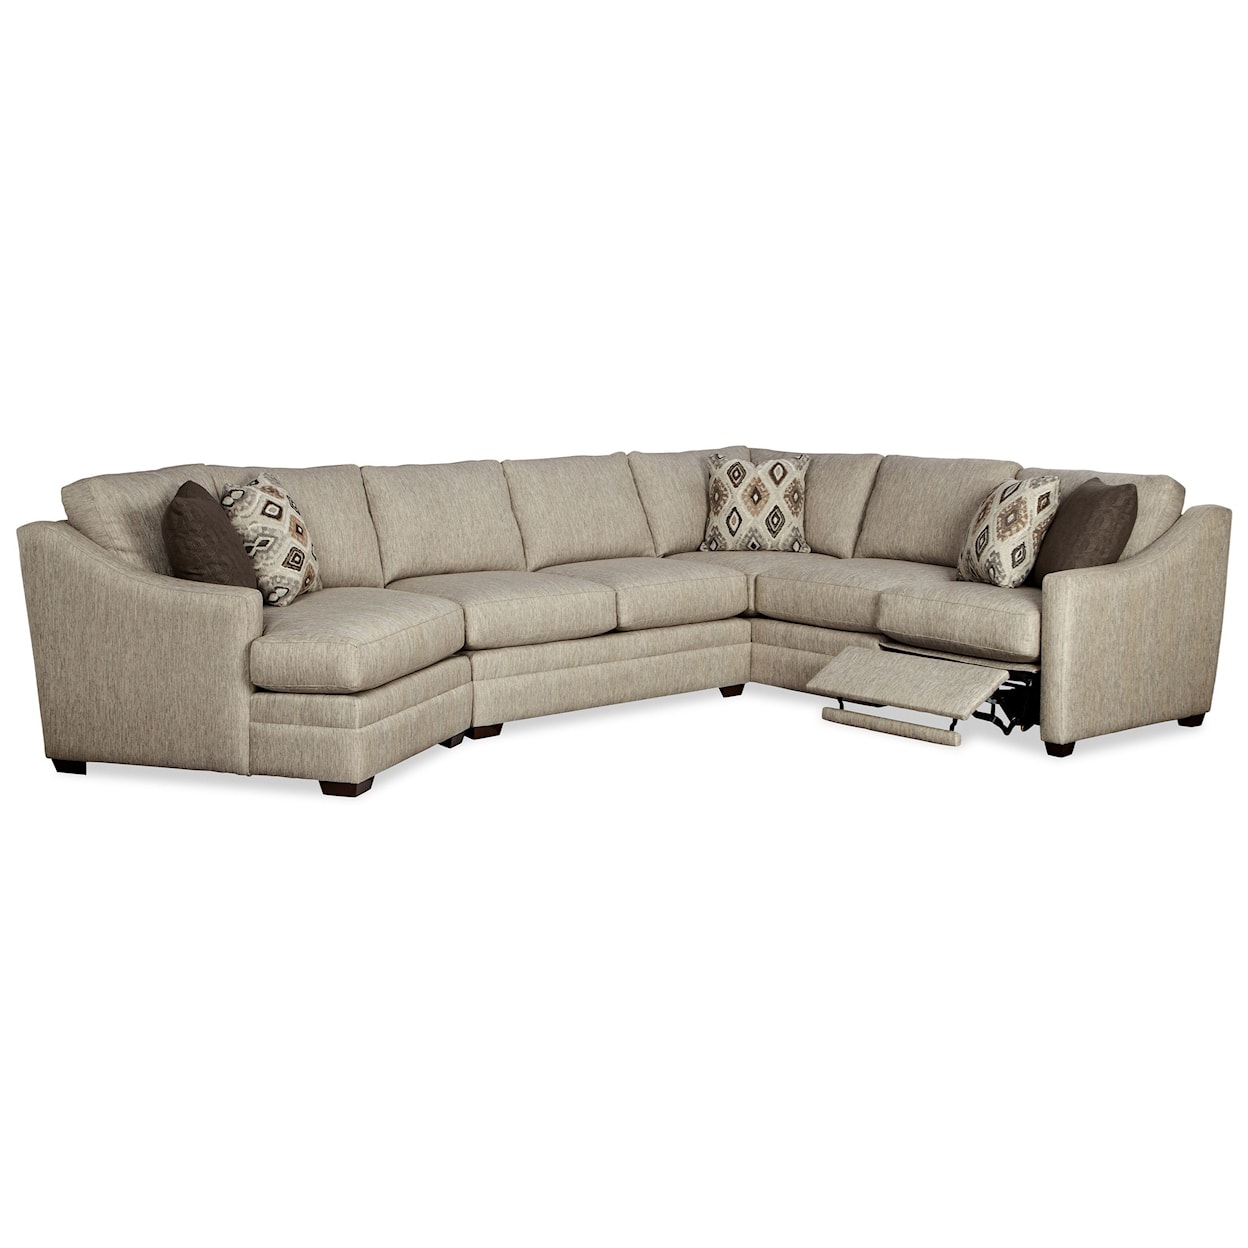 Craftmaster F9 Design Options 3 Pc Sectional Sofa w/ RAF Recliner